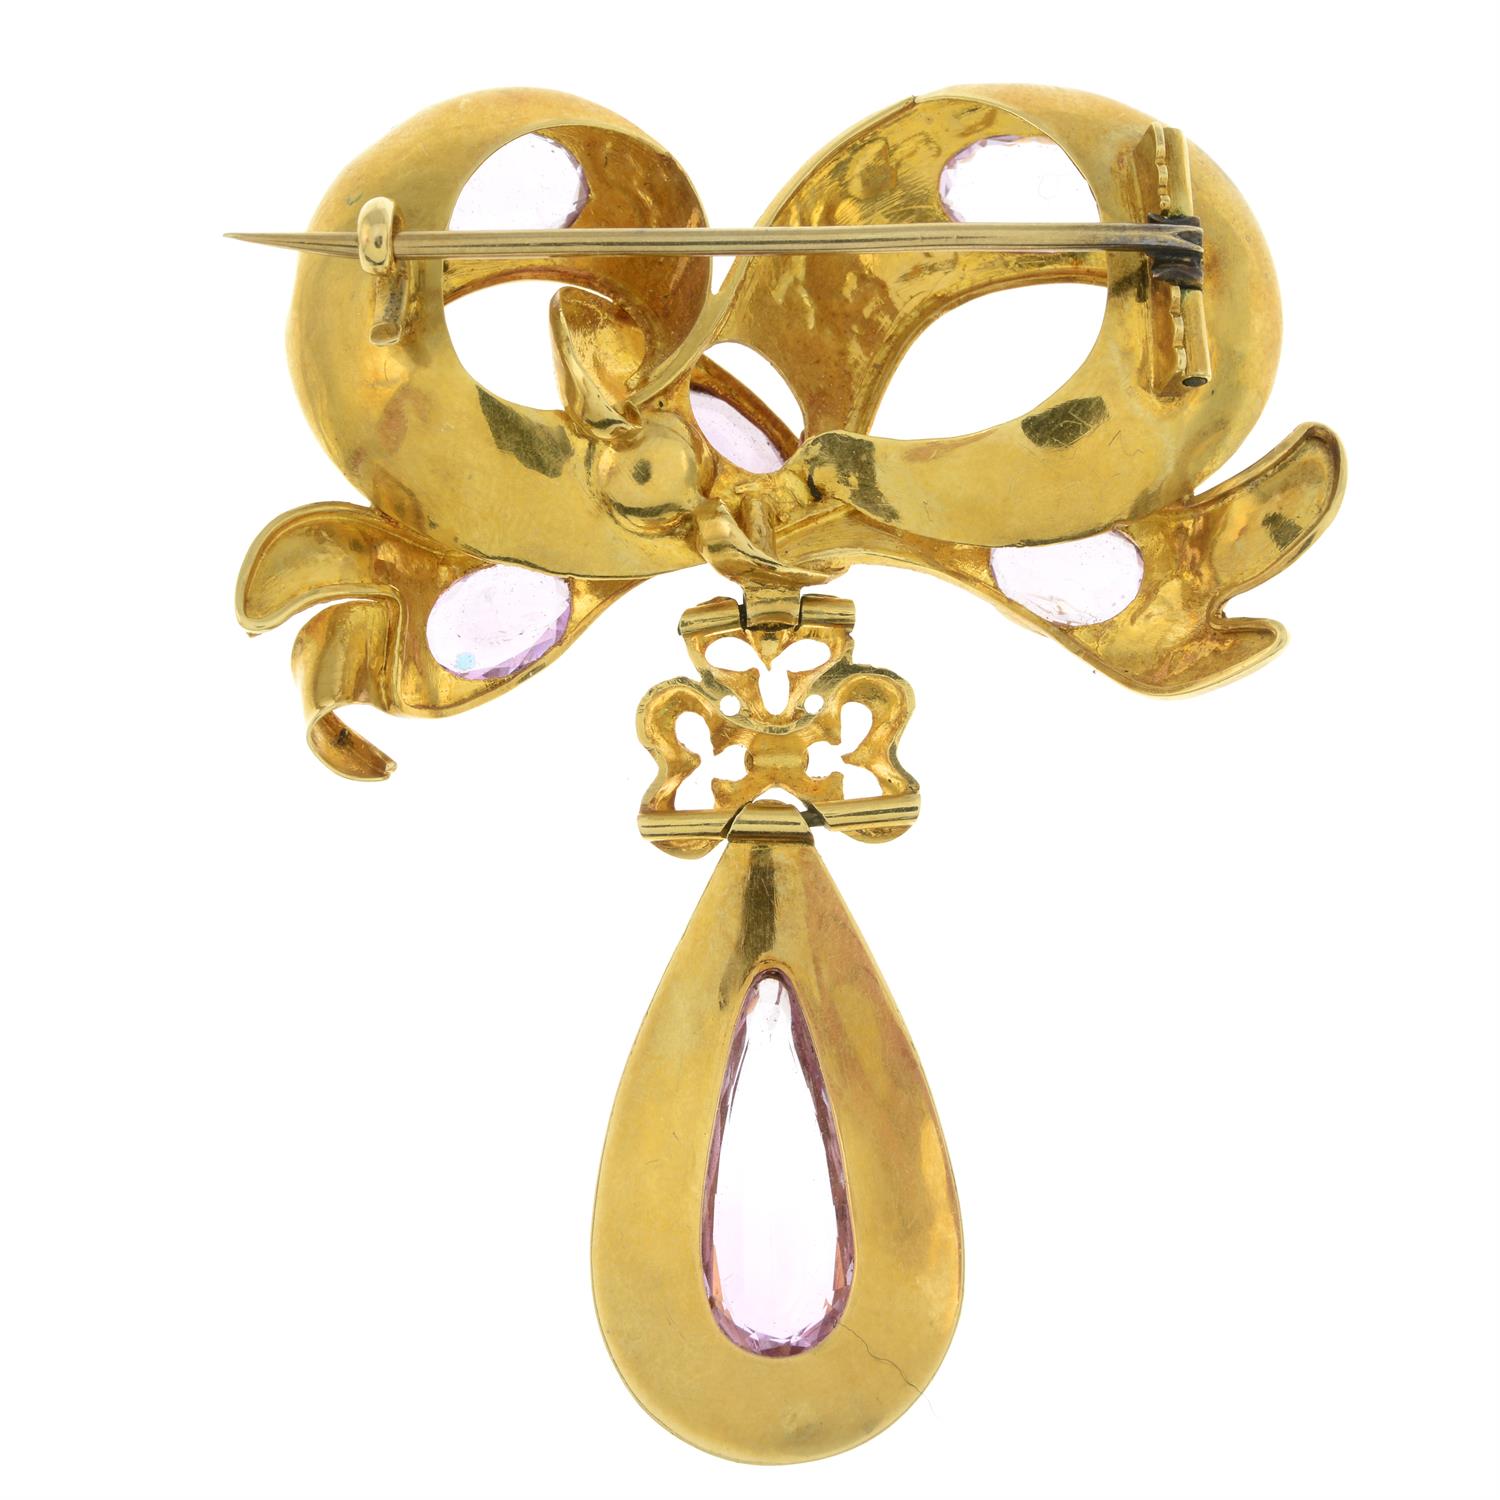 Mid 19th century gold pink topaz bow brooch - Image 3 of 4